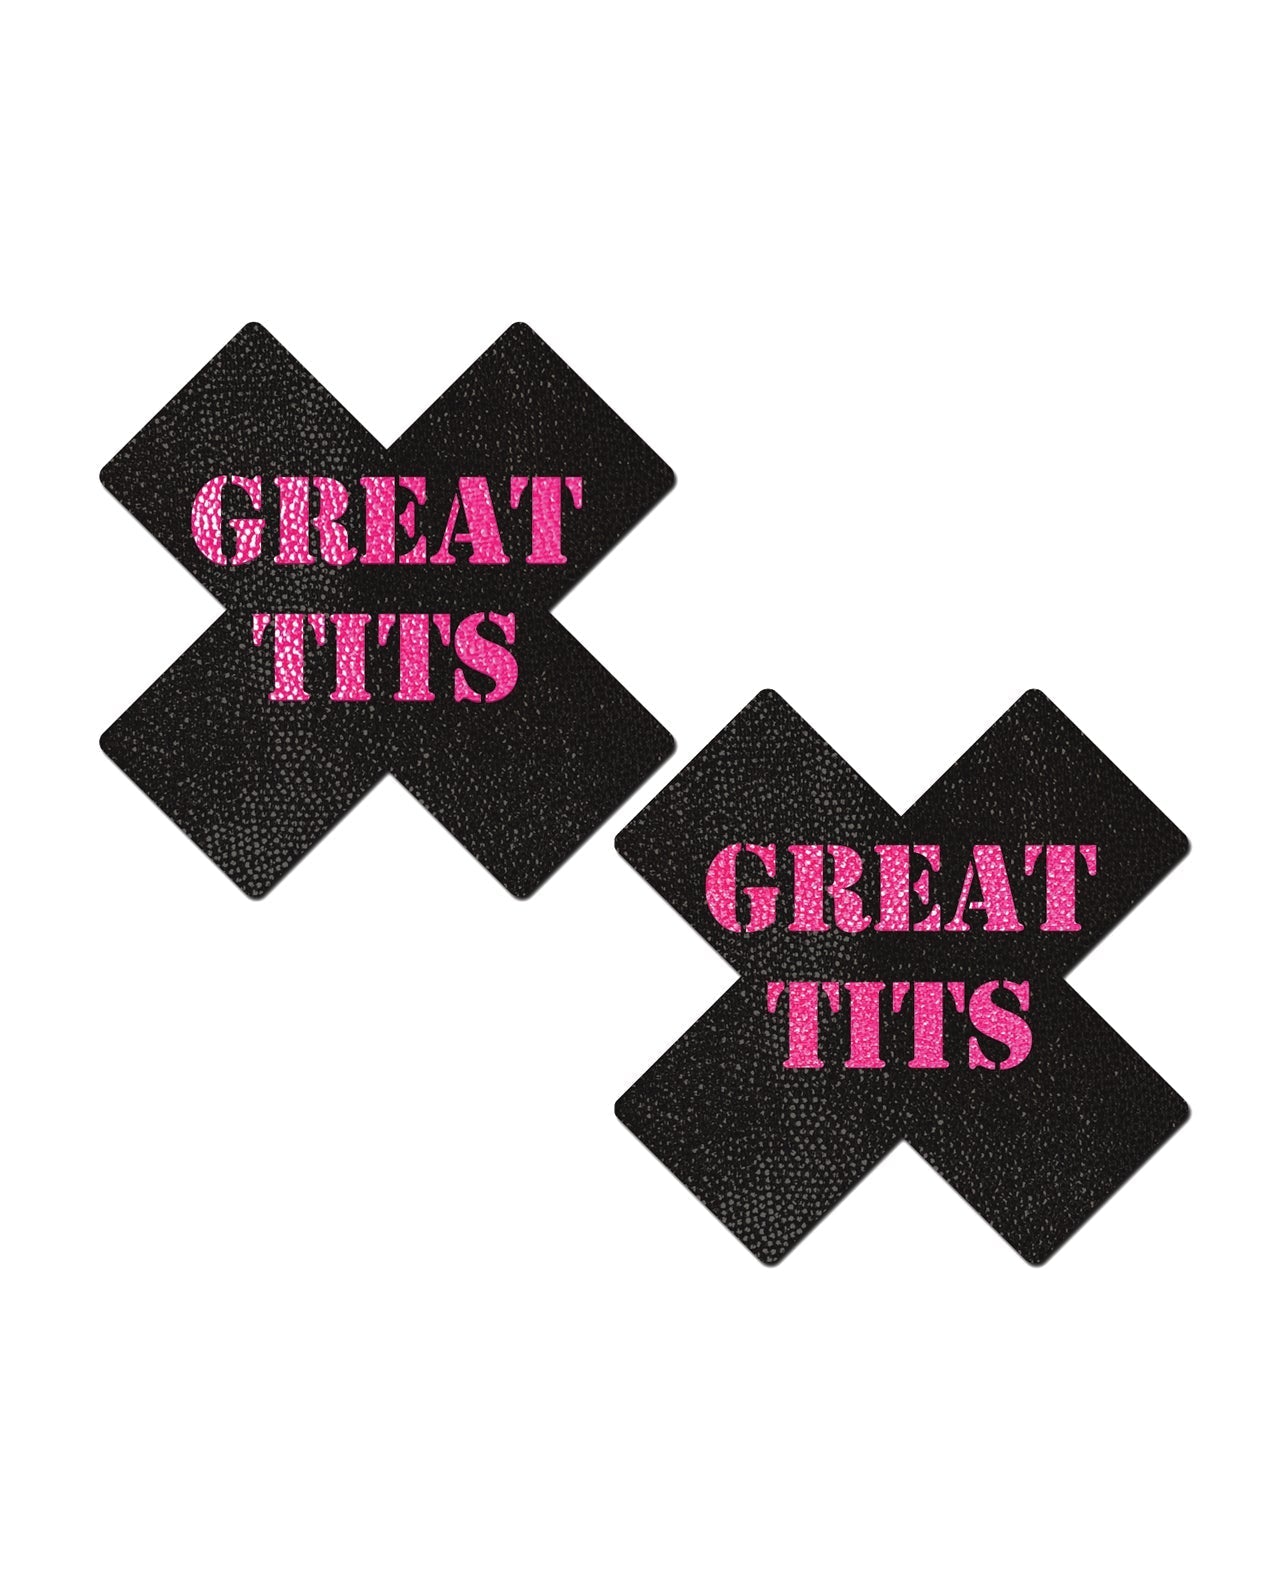 Pastease Premium Great Tits Cross - Black/Pink O/S